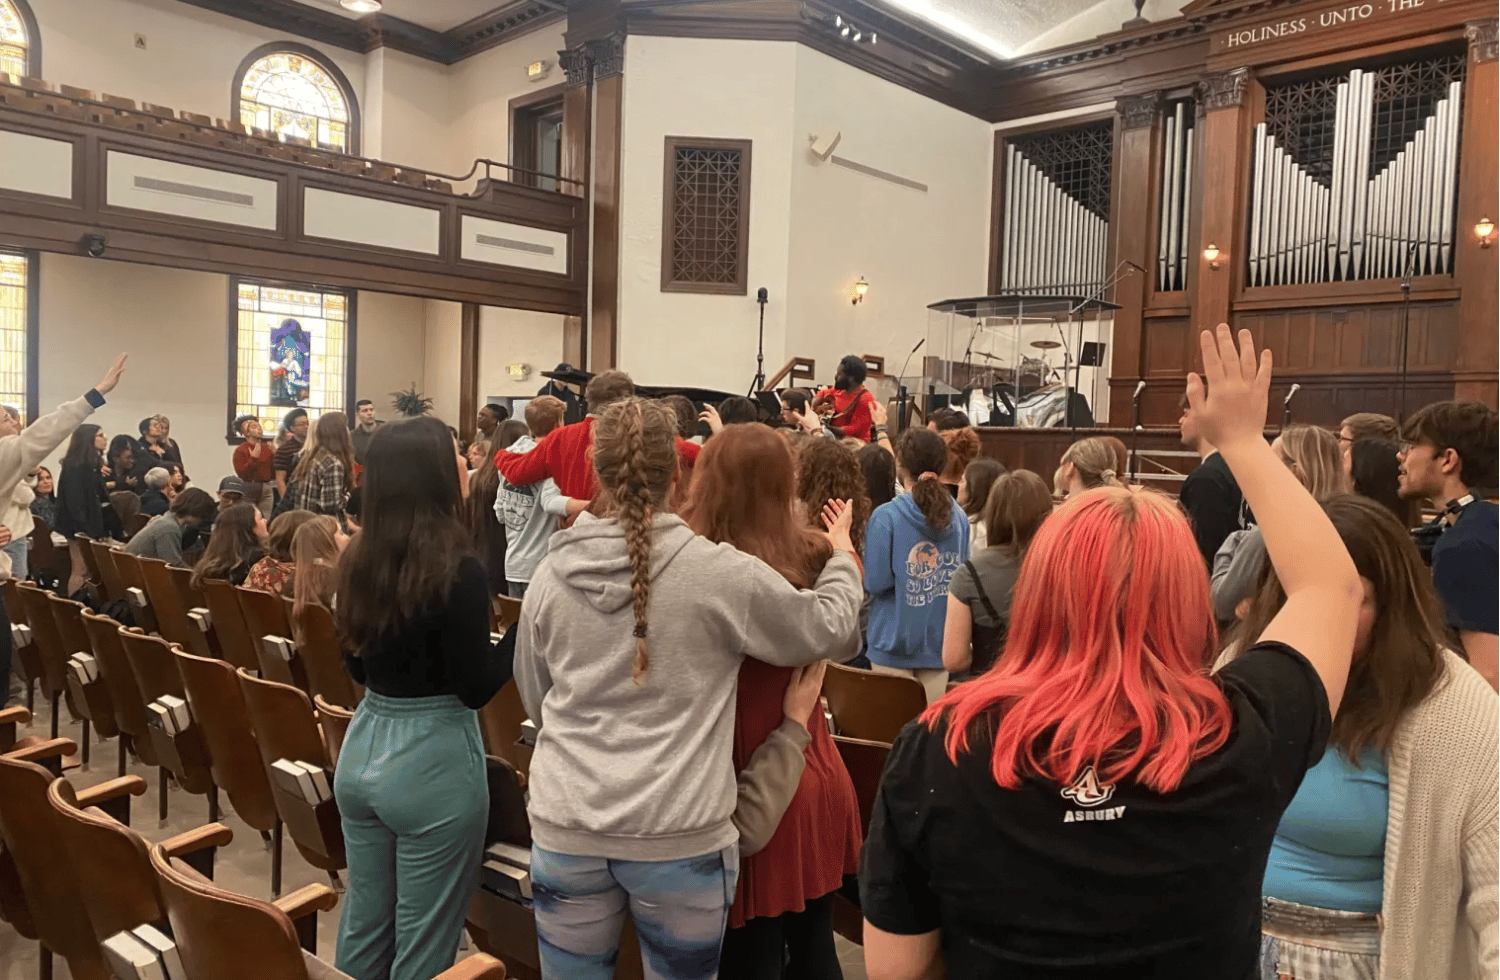 Revival rocked Asbury college in Kentucky in 1970 and many are saying it’s happening again